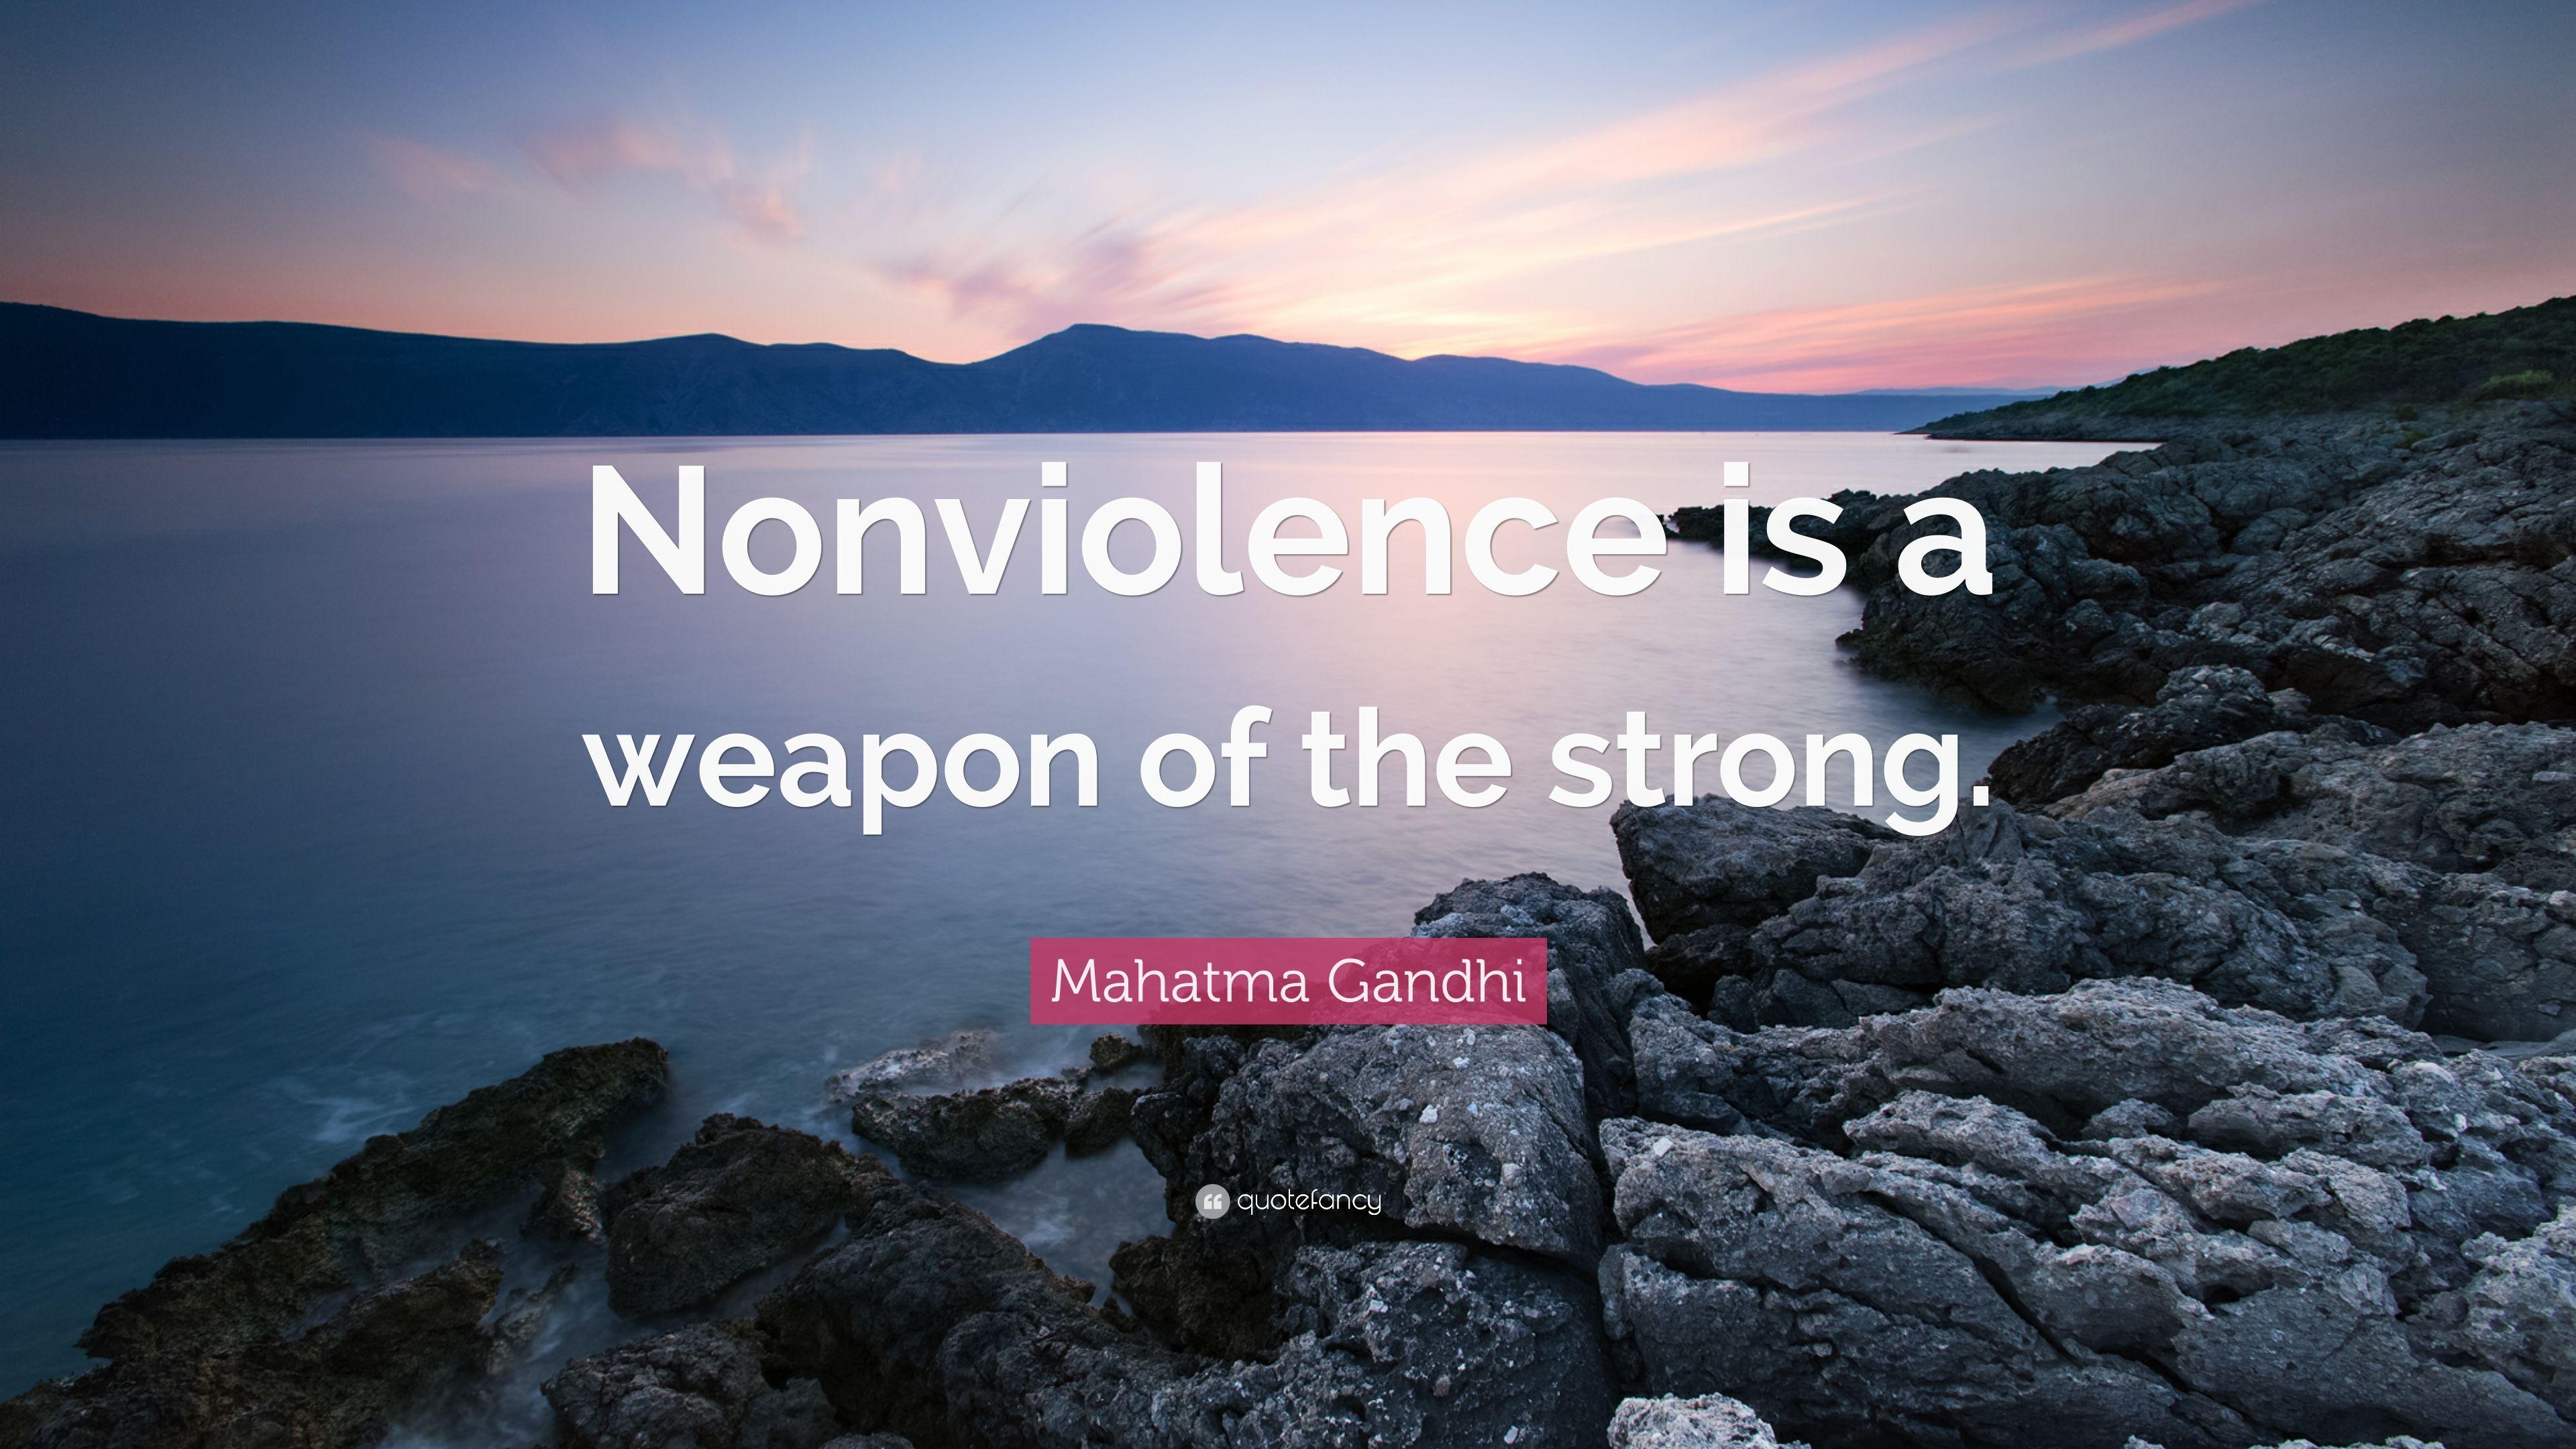 Mahatma Gandhi Quote: “Nonviolence is a weapon of the strong.” (12 wallpaper)